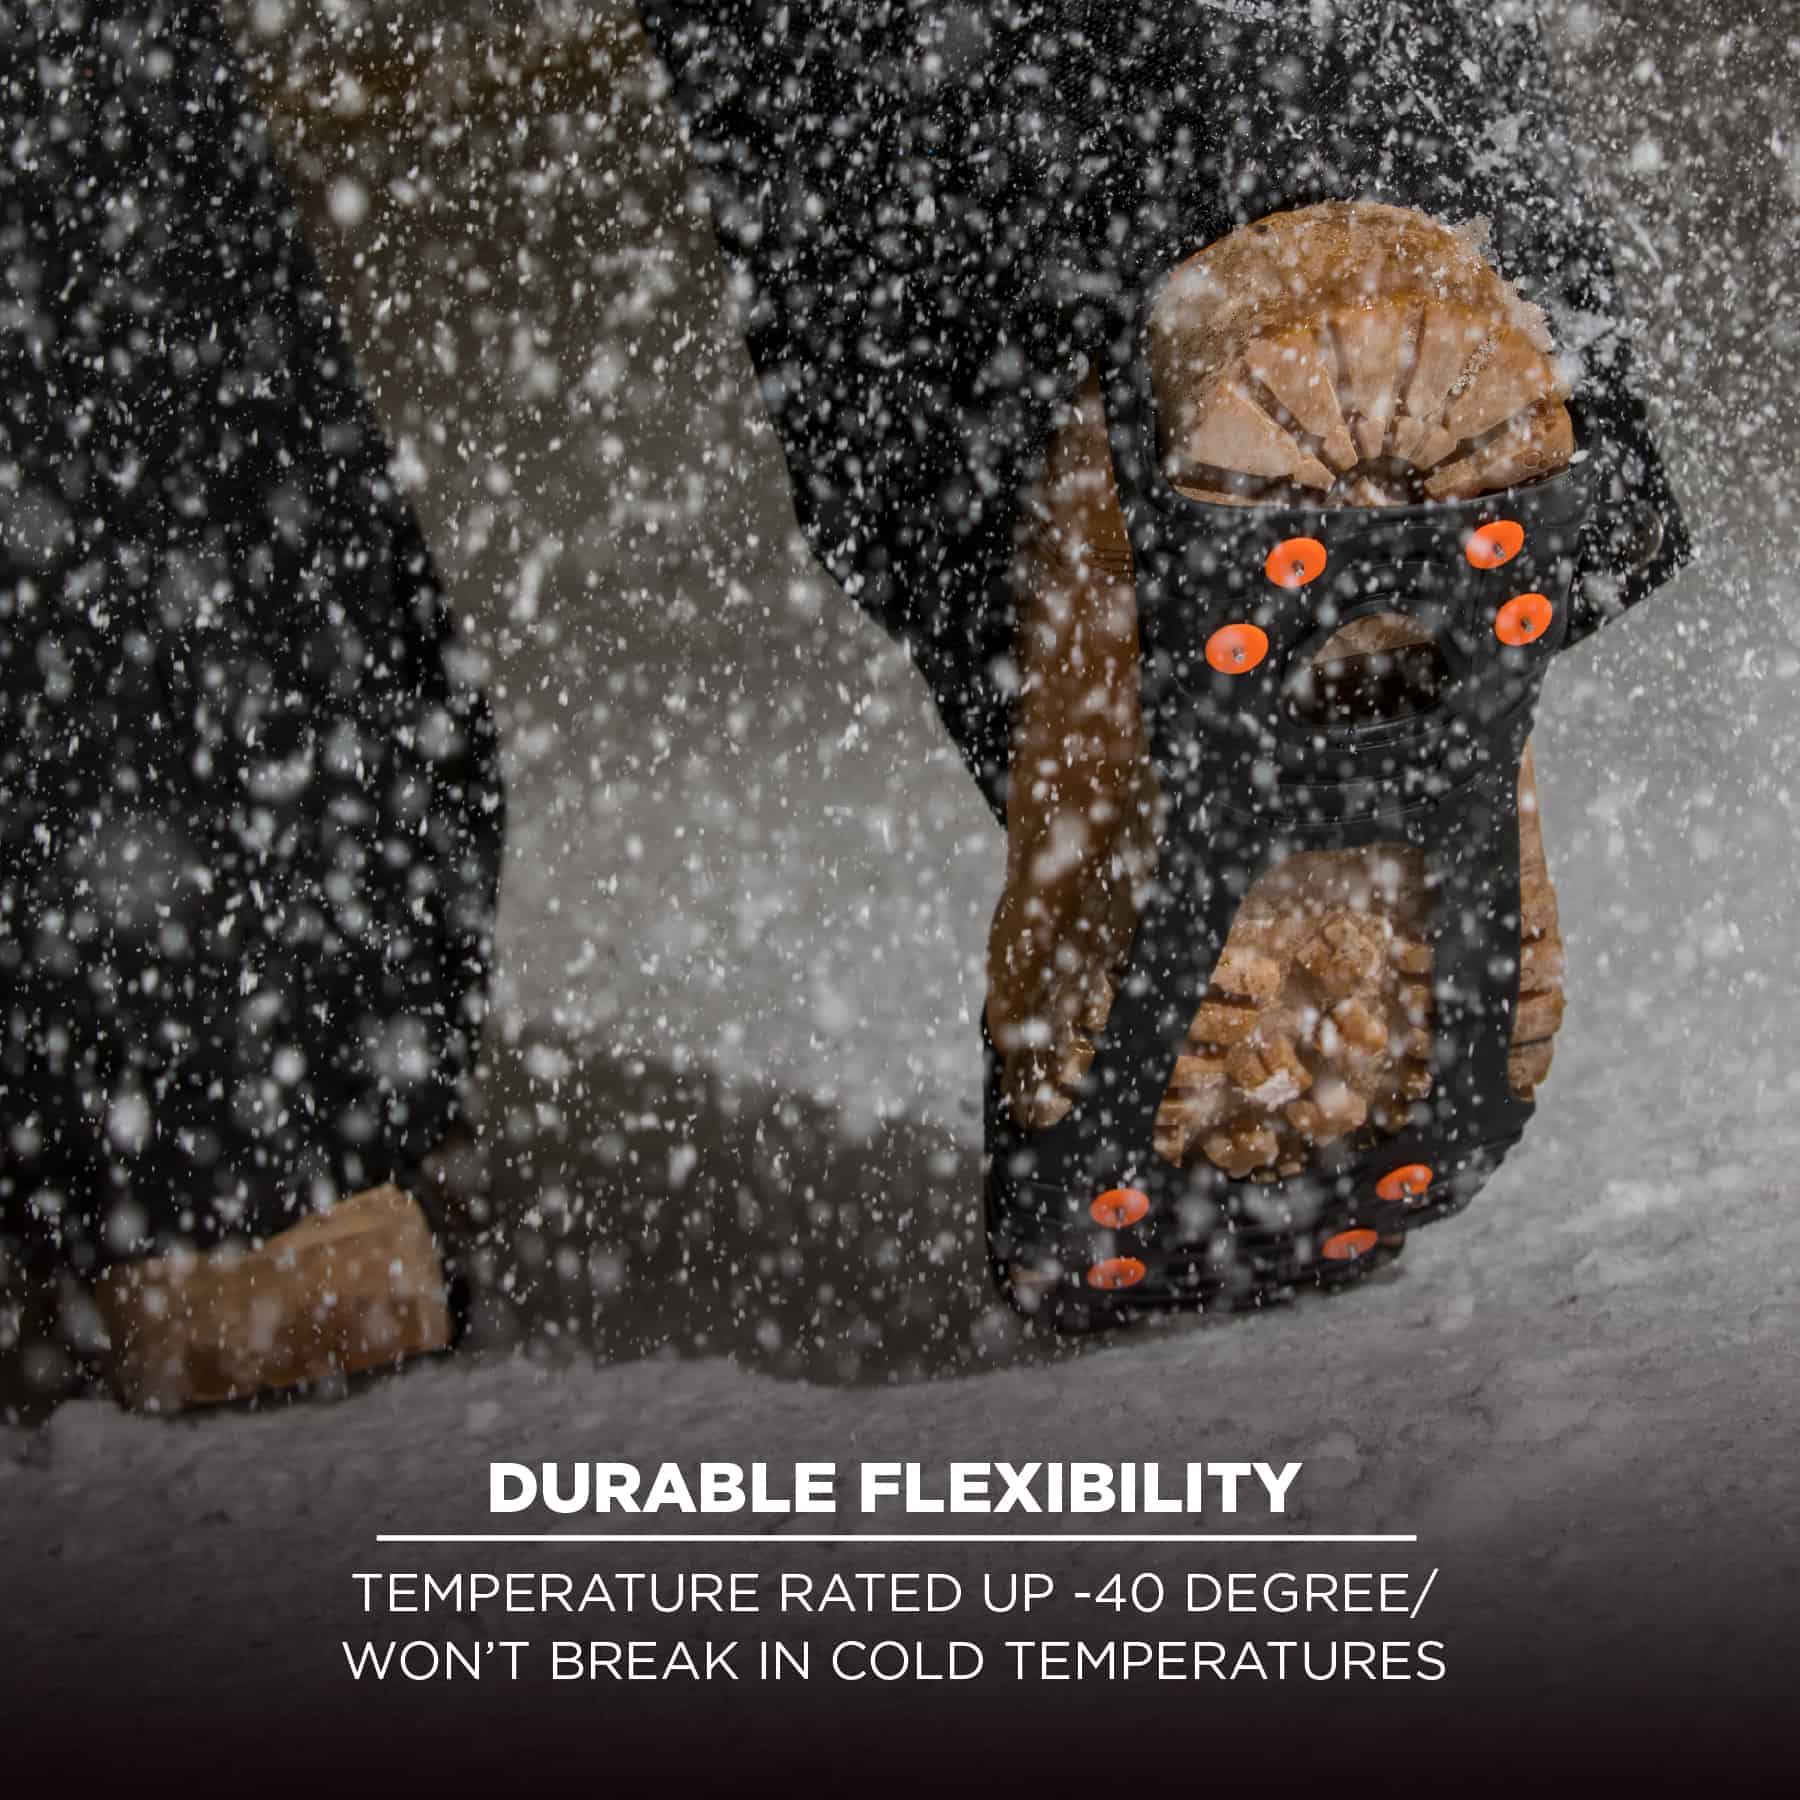 Details about   NEW Ergodyne TREX Ice Traction Devices XL 11 to 15 #6300 Work Gear